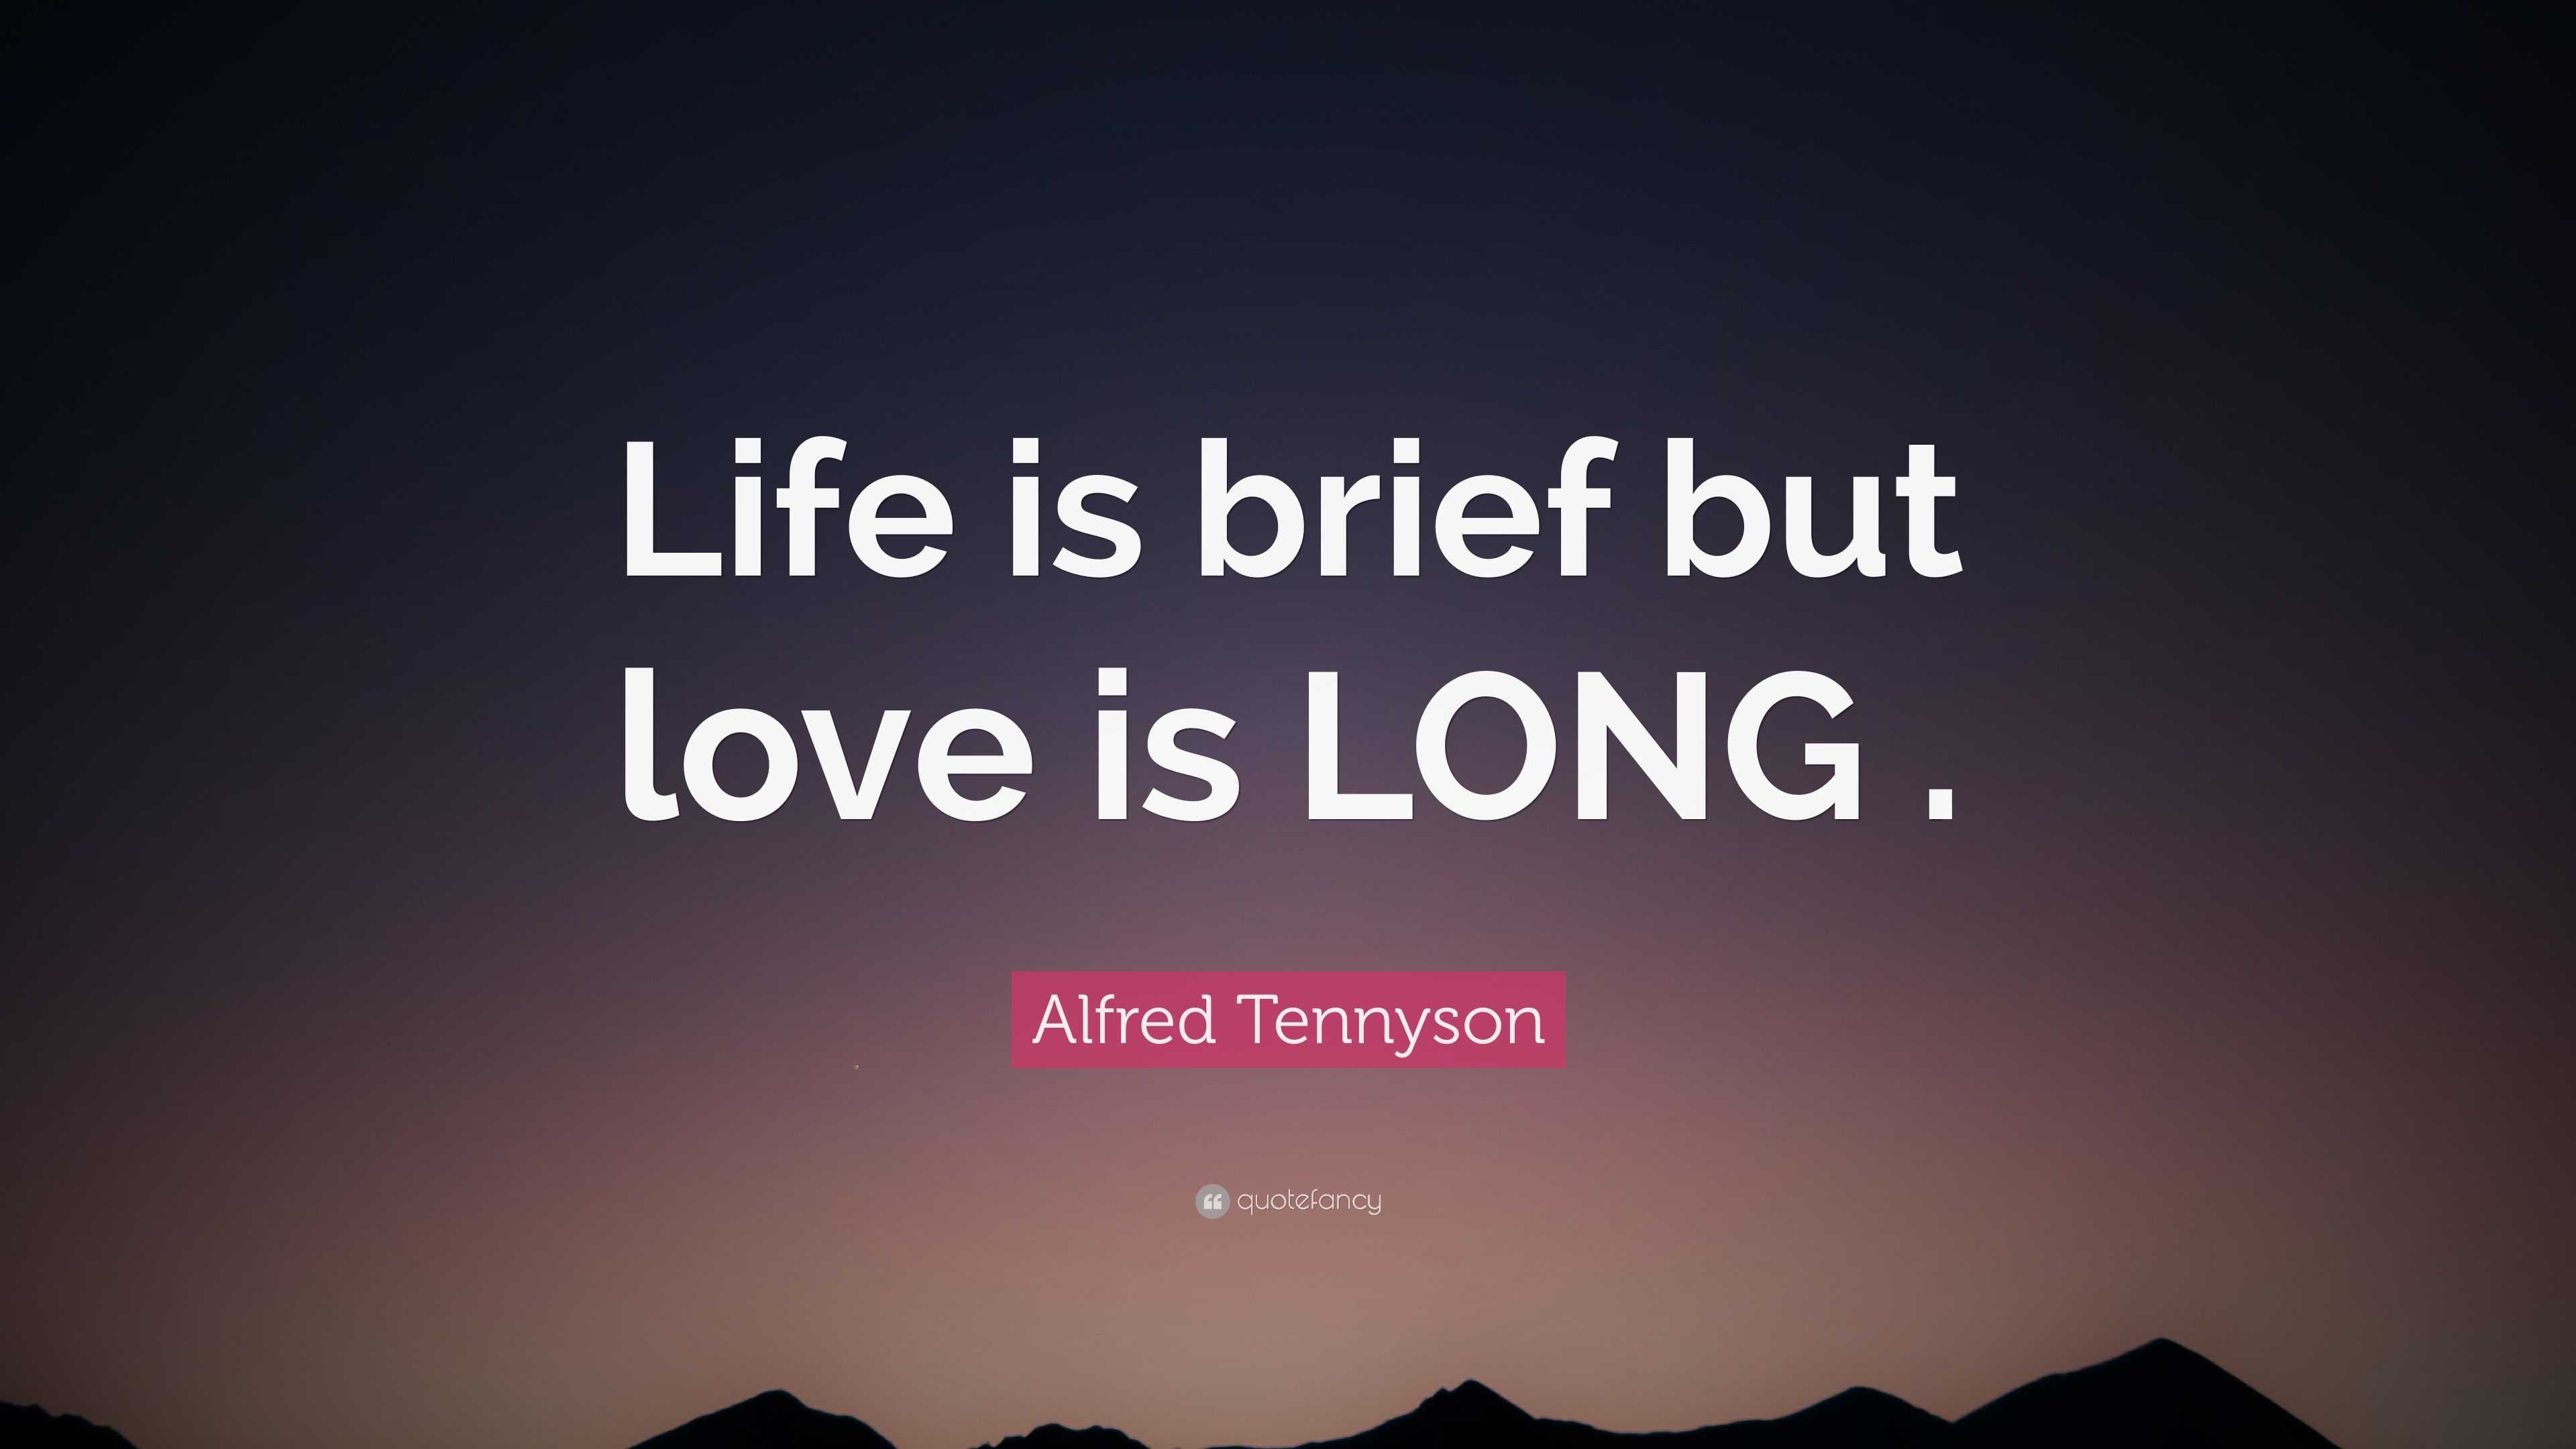 Alfred Tennyson Quote: “Life is brief but love is LONG .”